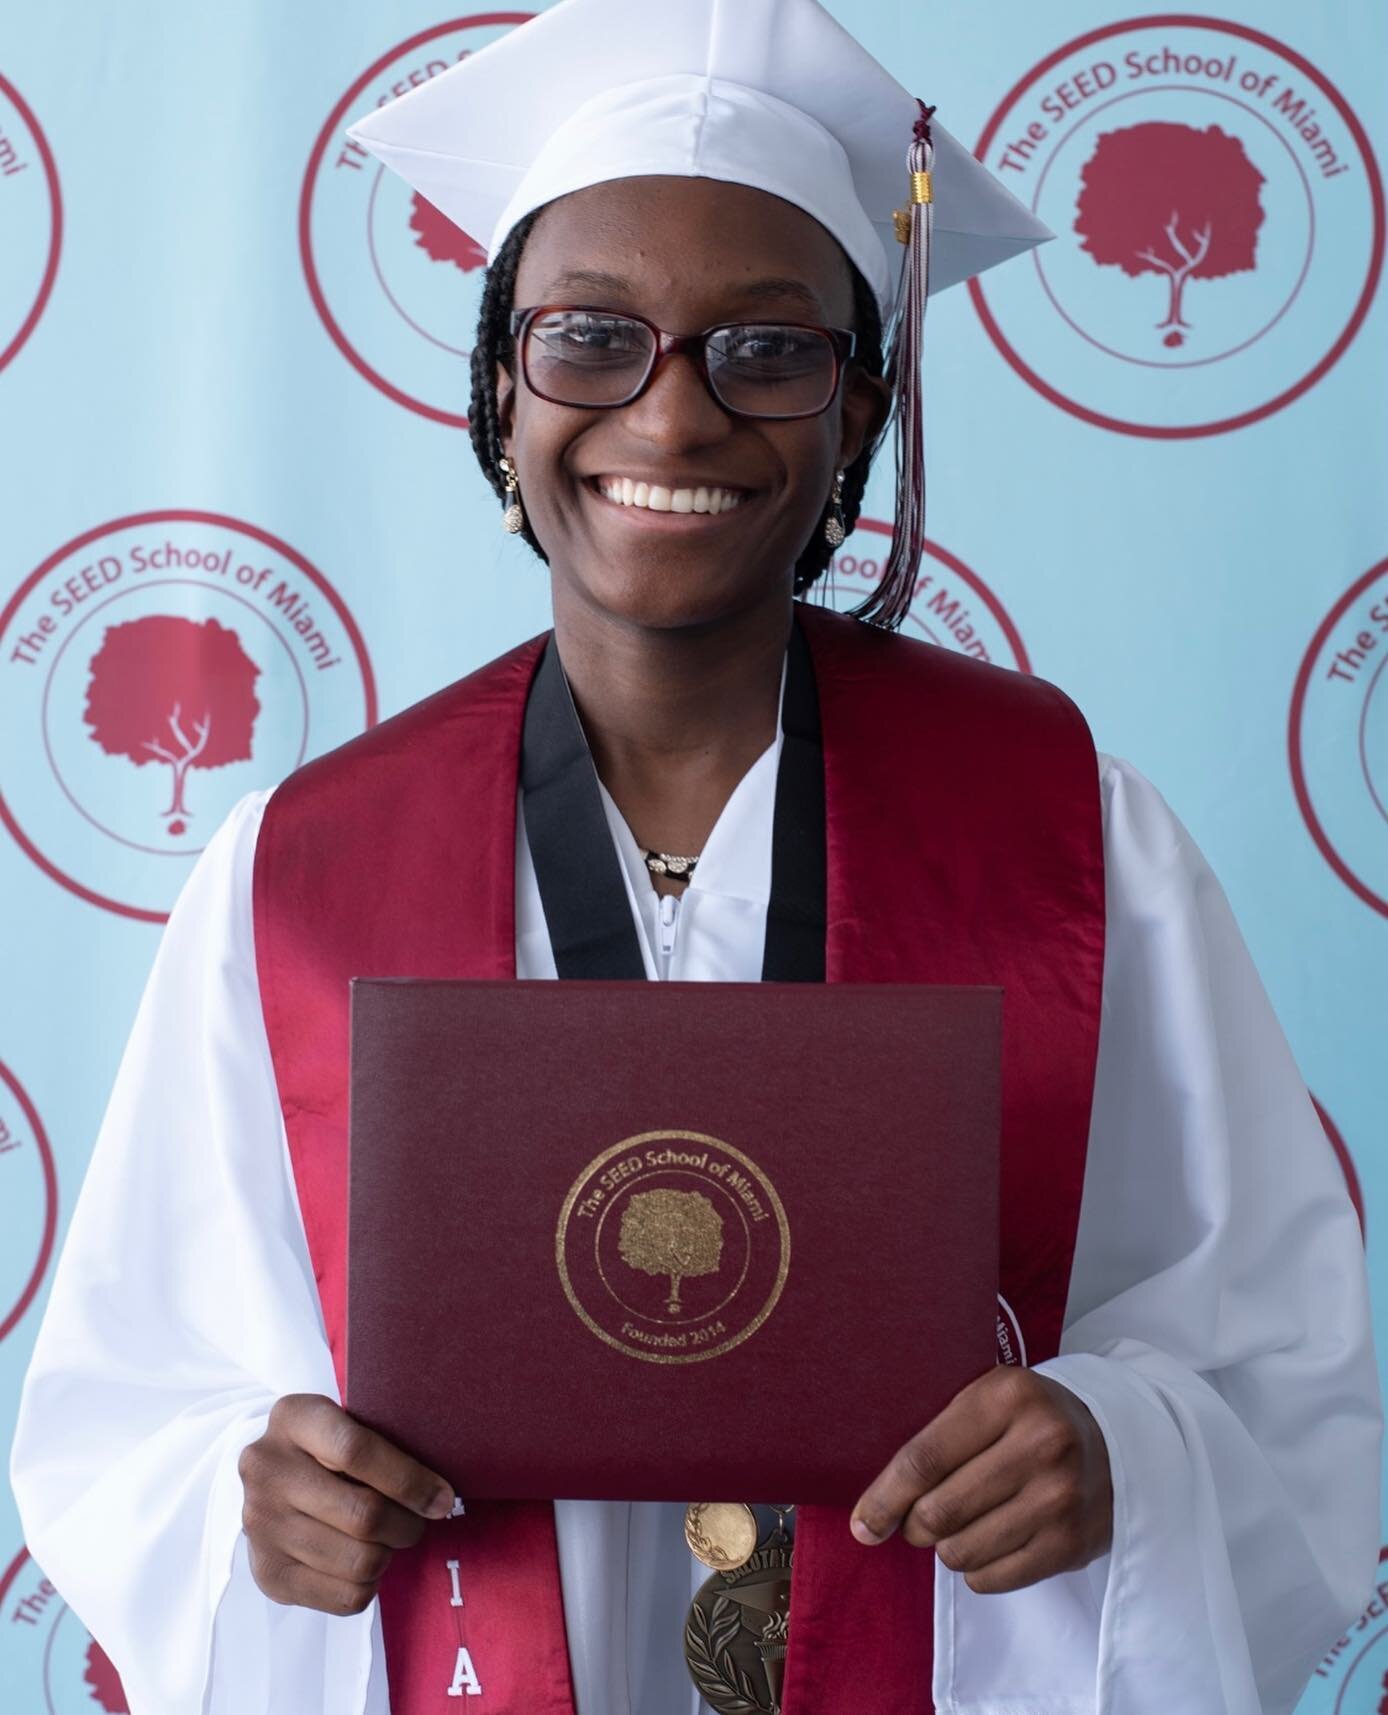 It&rsquo;s celebration FriYAY🎉 at @seedmiami today! Rose, Alumni from the Class of 2022, was selected as the Valedictorian for the Ed Equity Lab National Honor Society out of thousands of students across the country. We are incredibly proud of all y